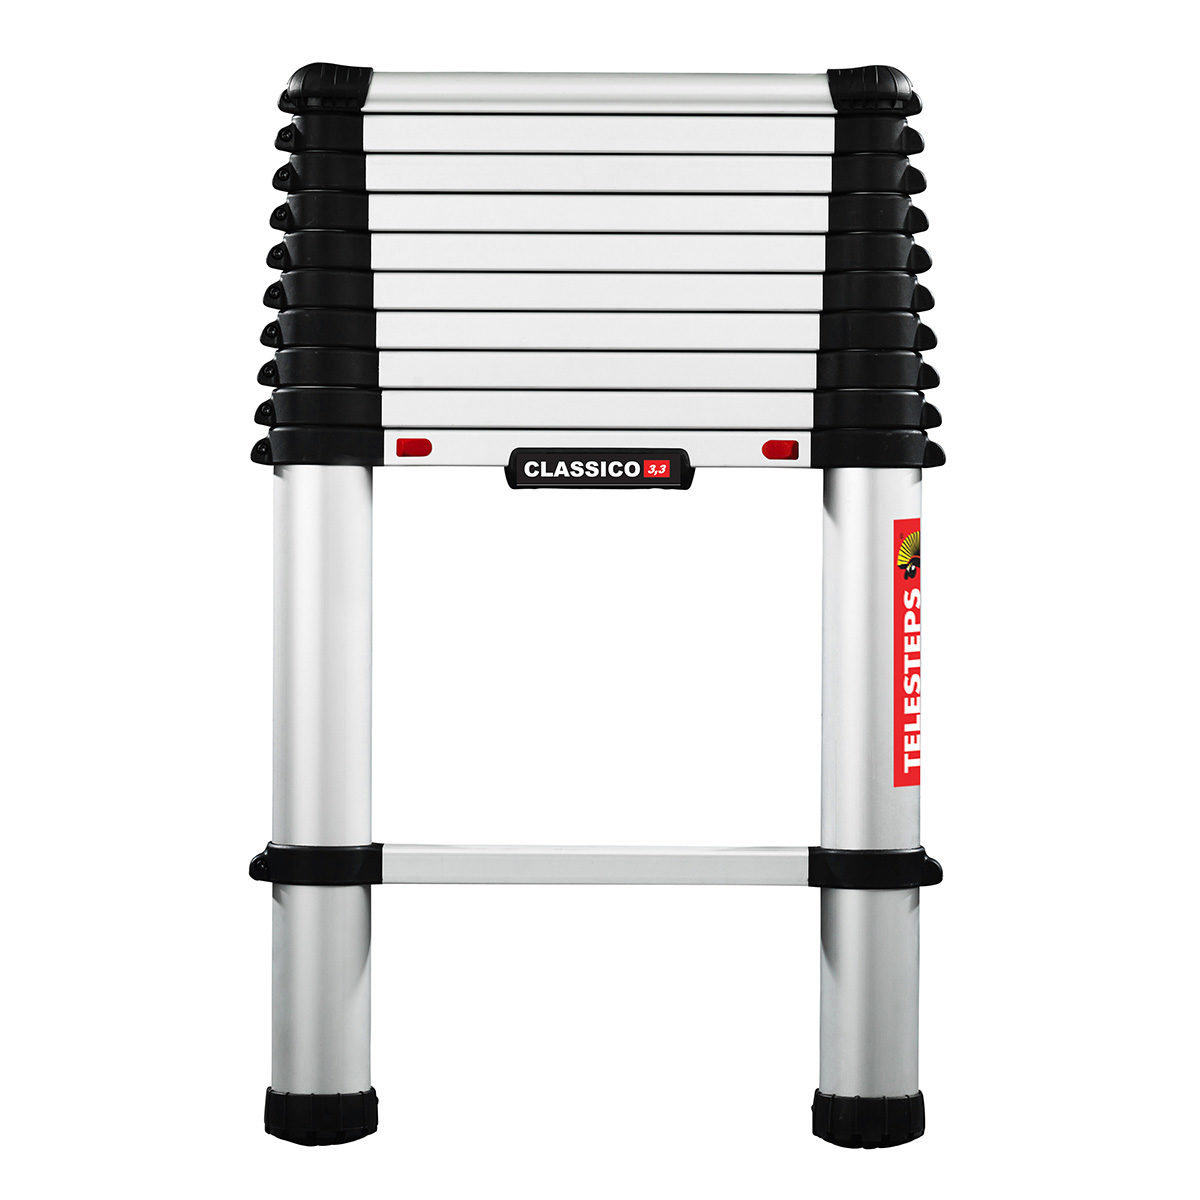 classico-line-33-front-leaning-ladders-1200x1200